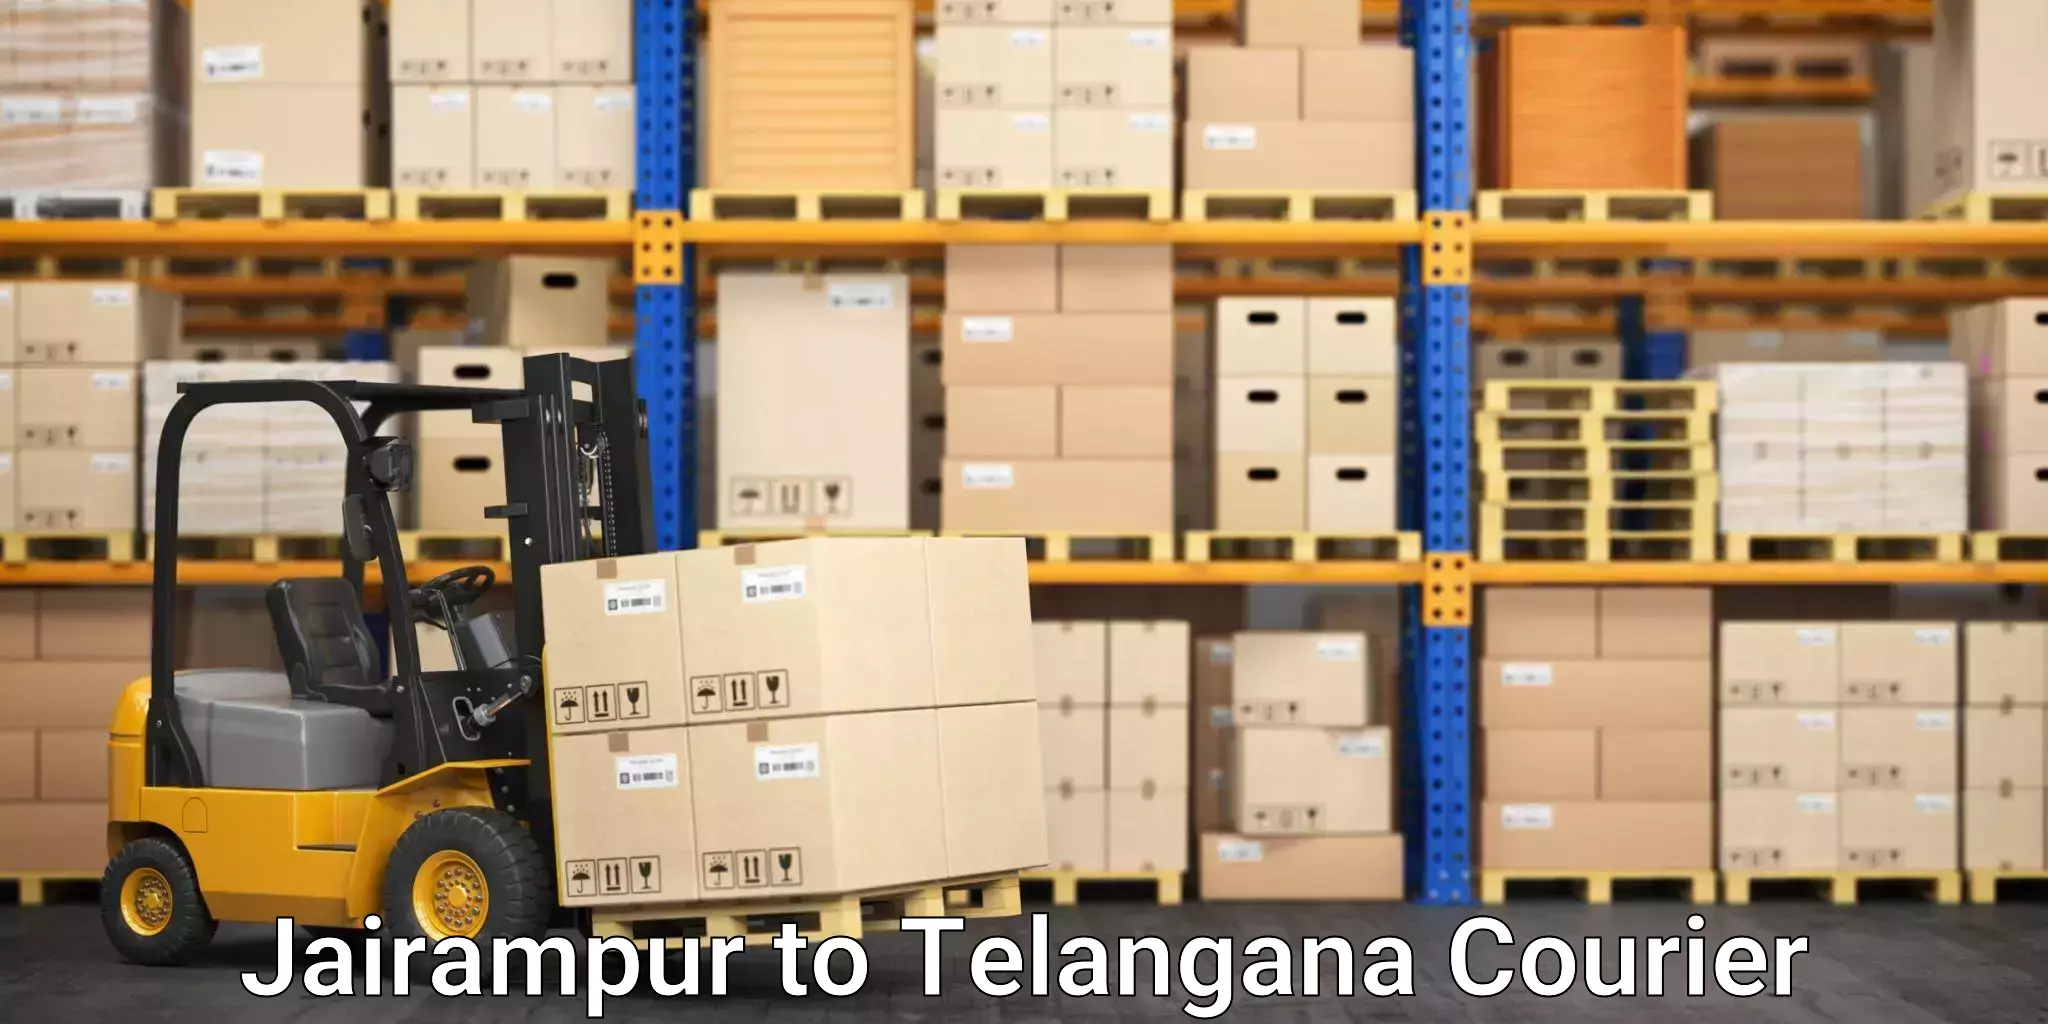 Comprehensive parcel tracking in Jairampur to Khairatabad